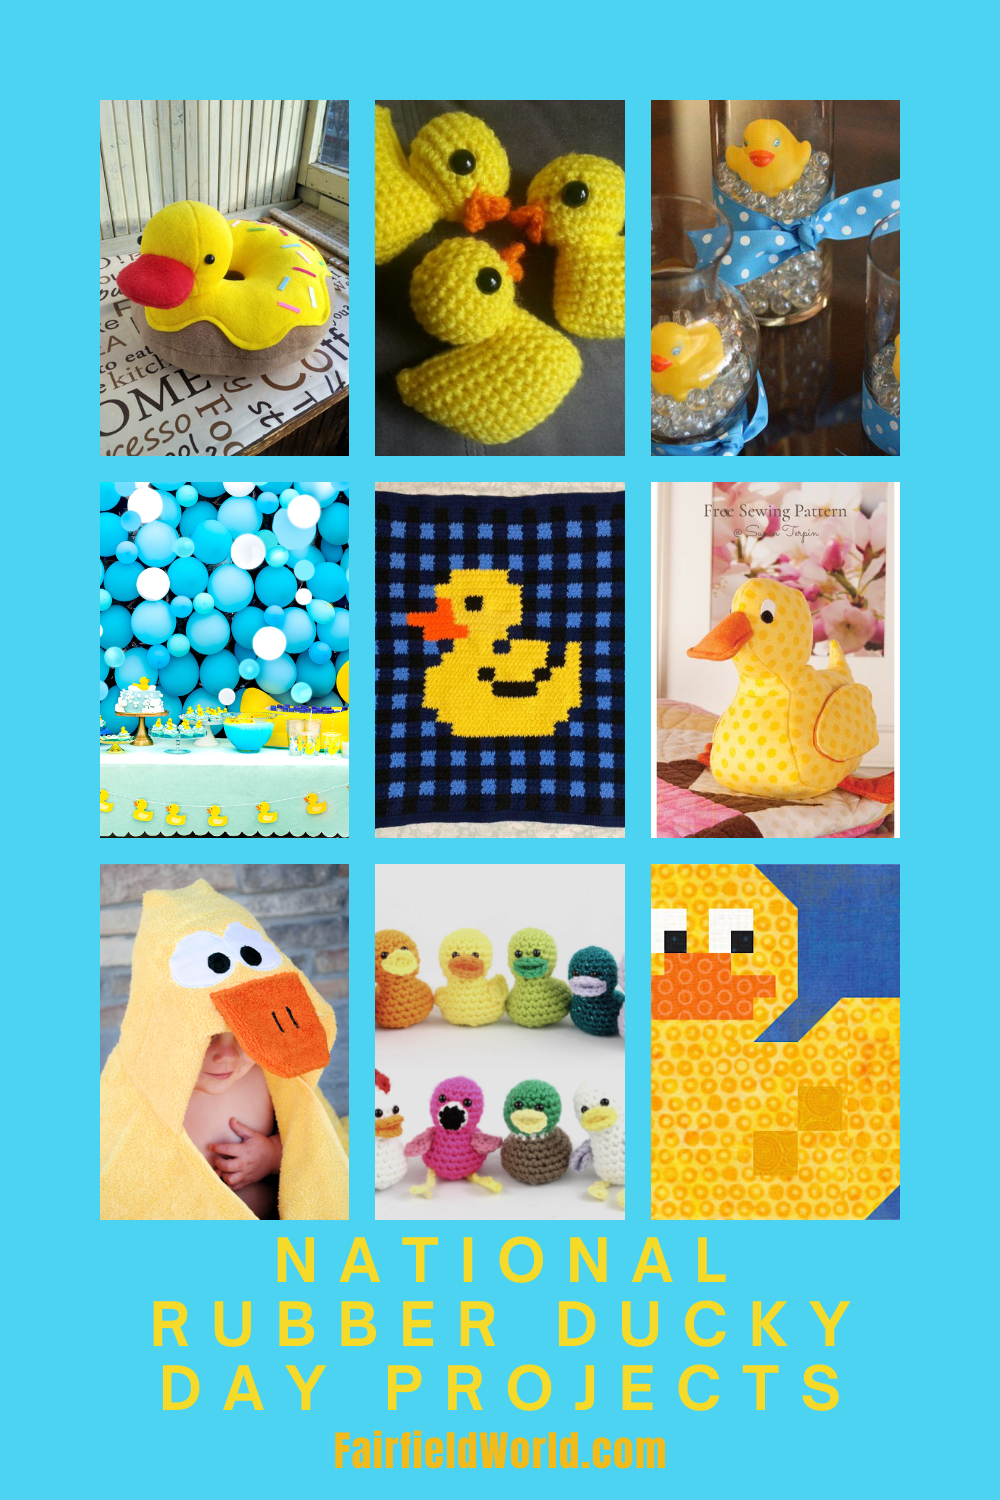 National Rubber Ducky Day projects